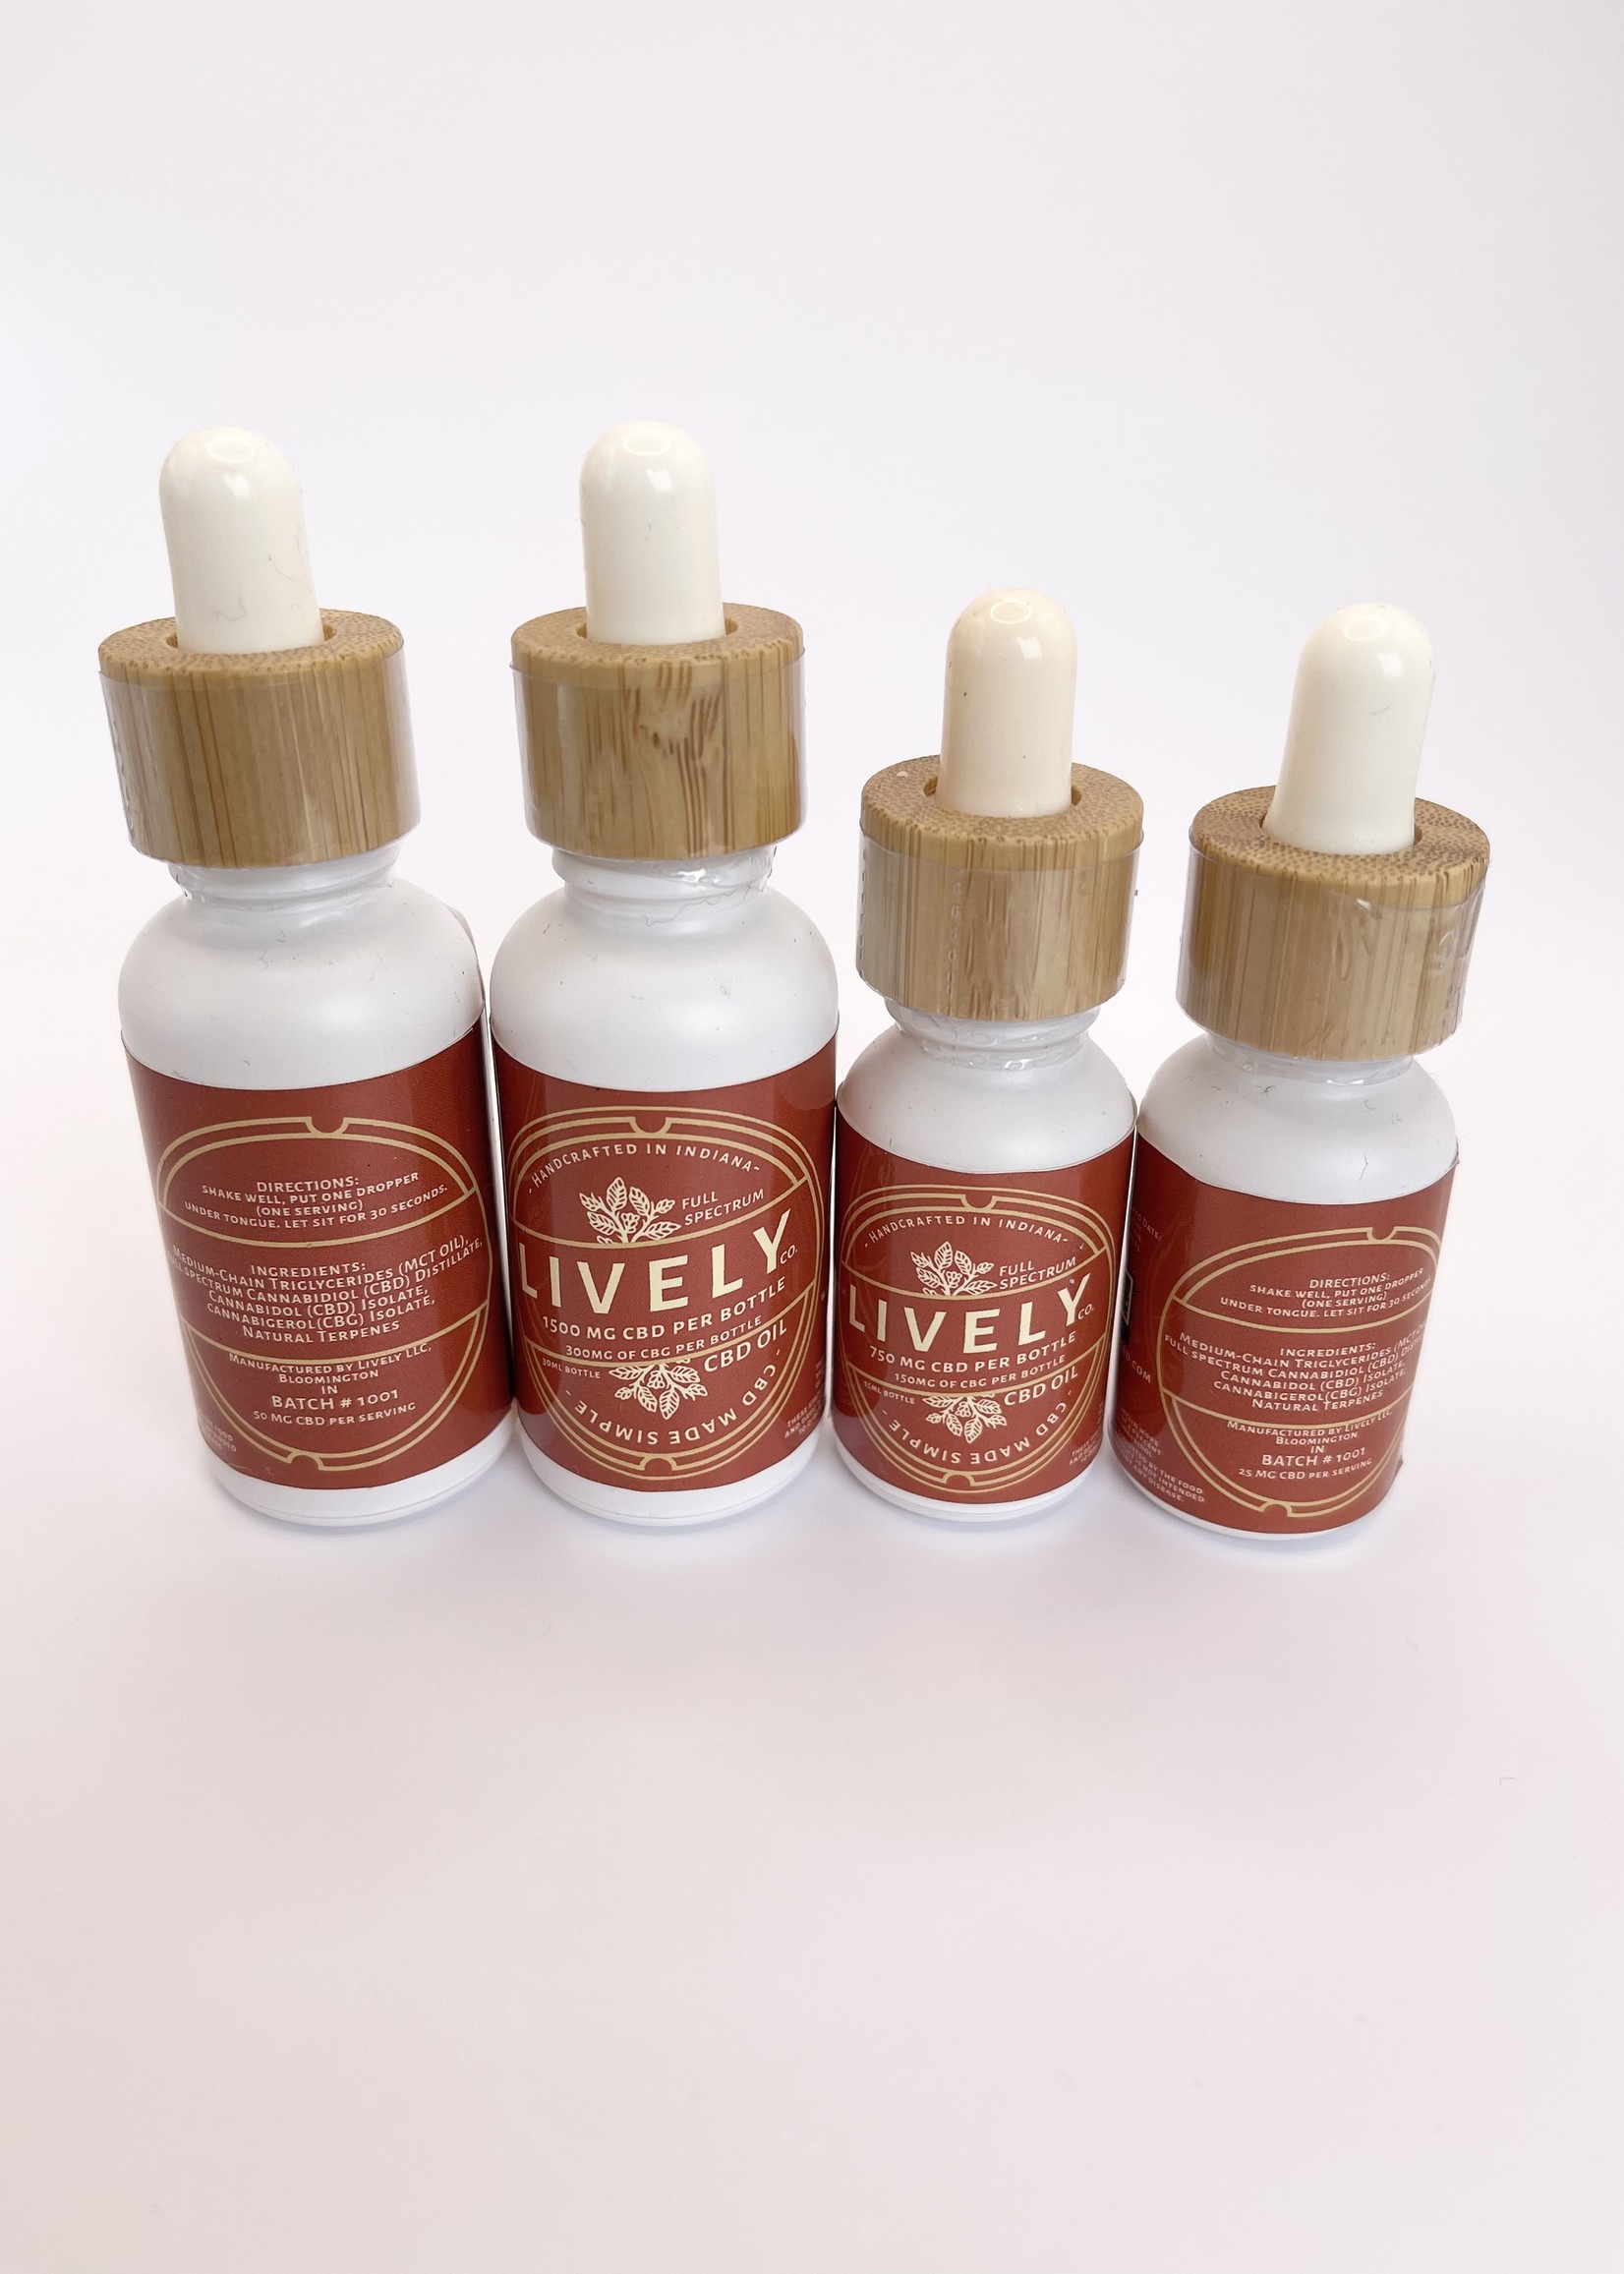 Lively co Lively co tincture